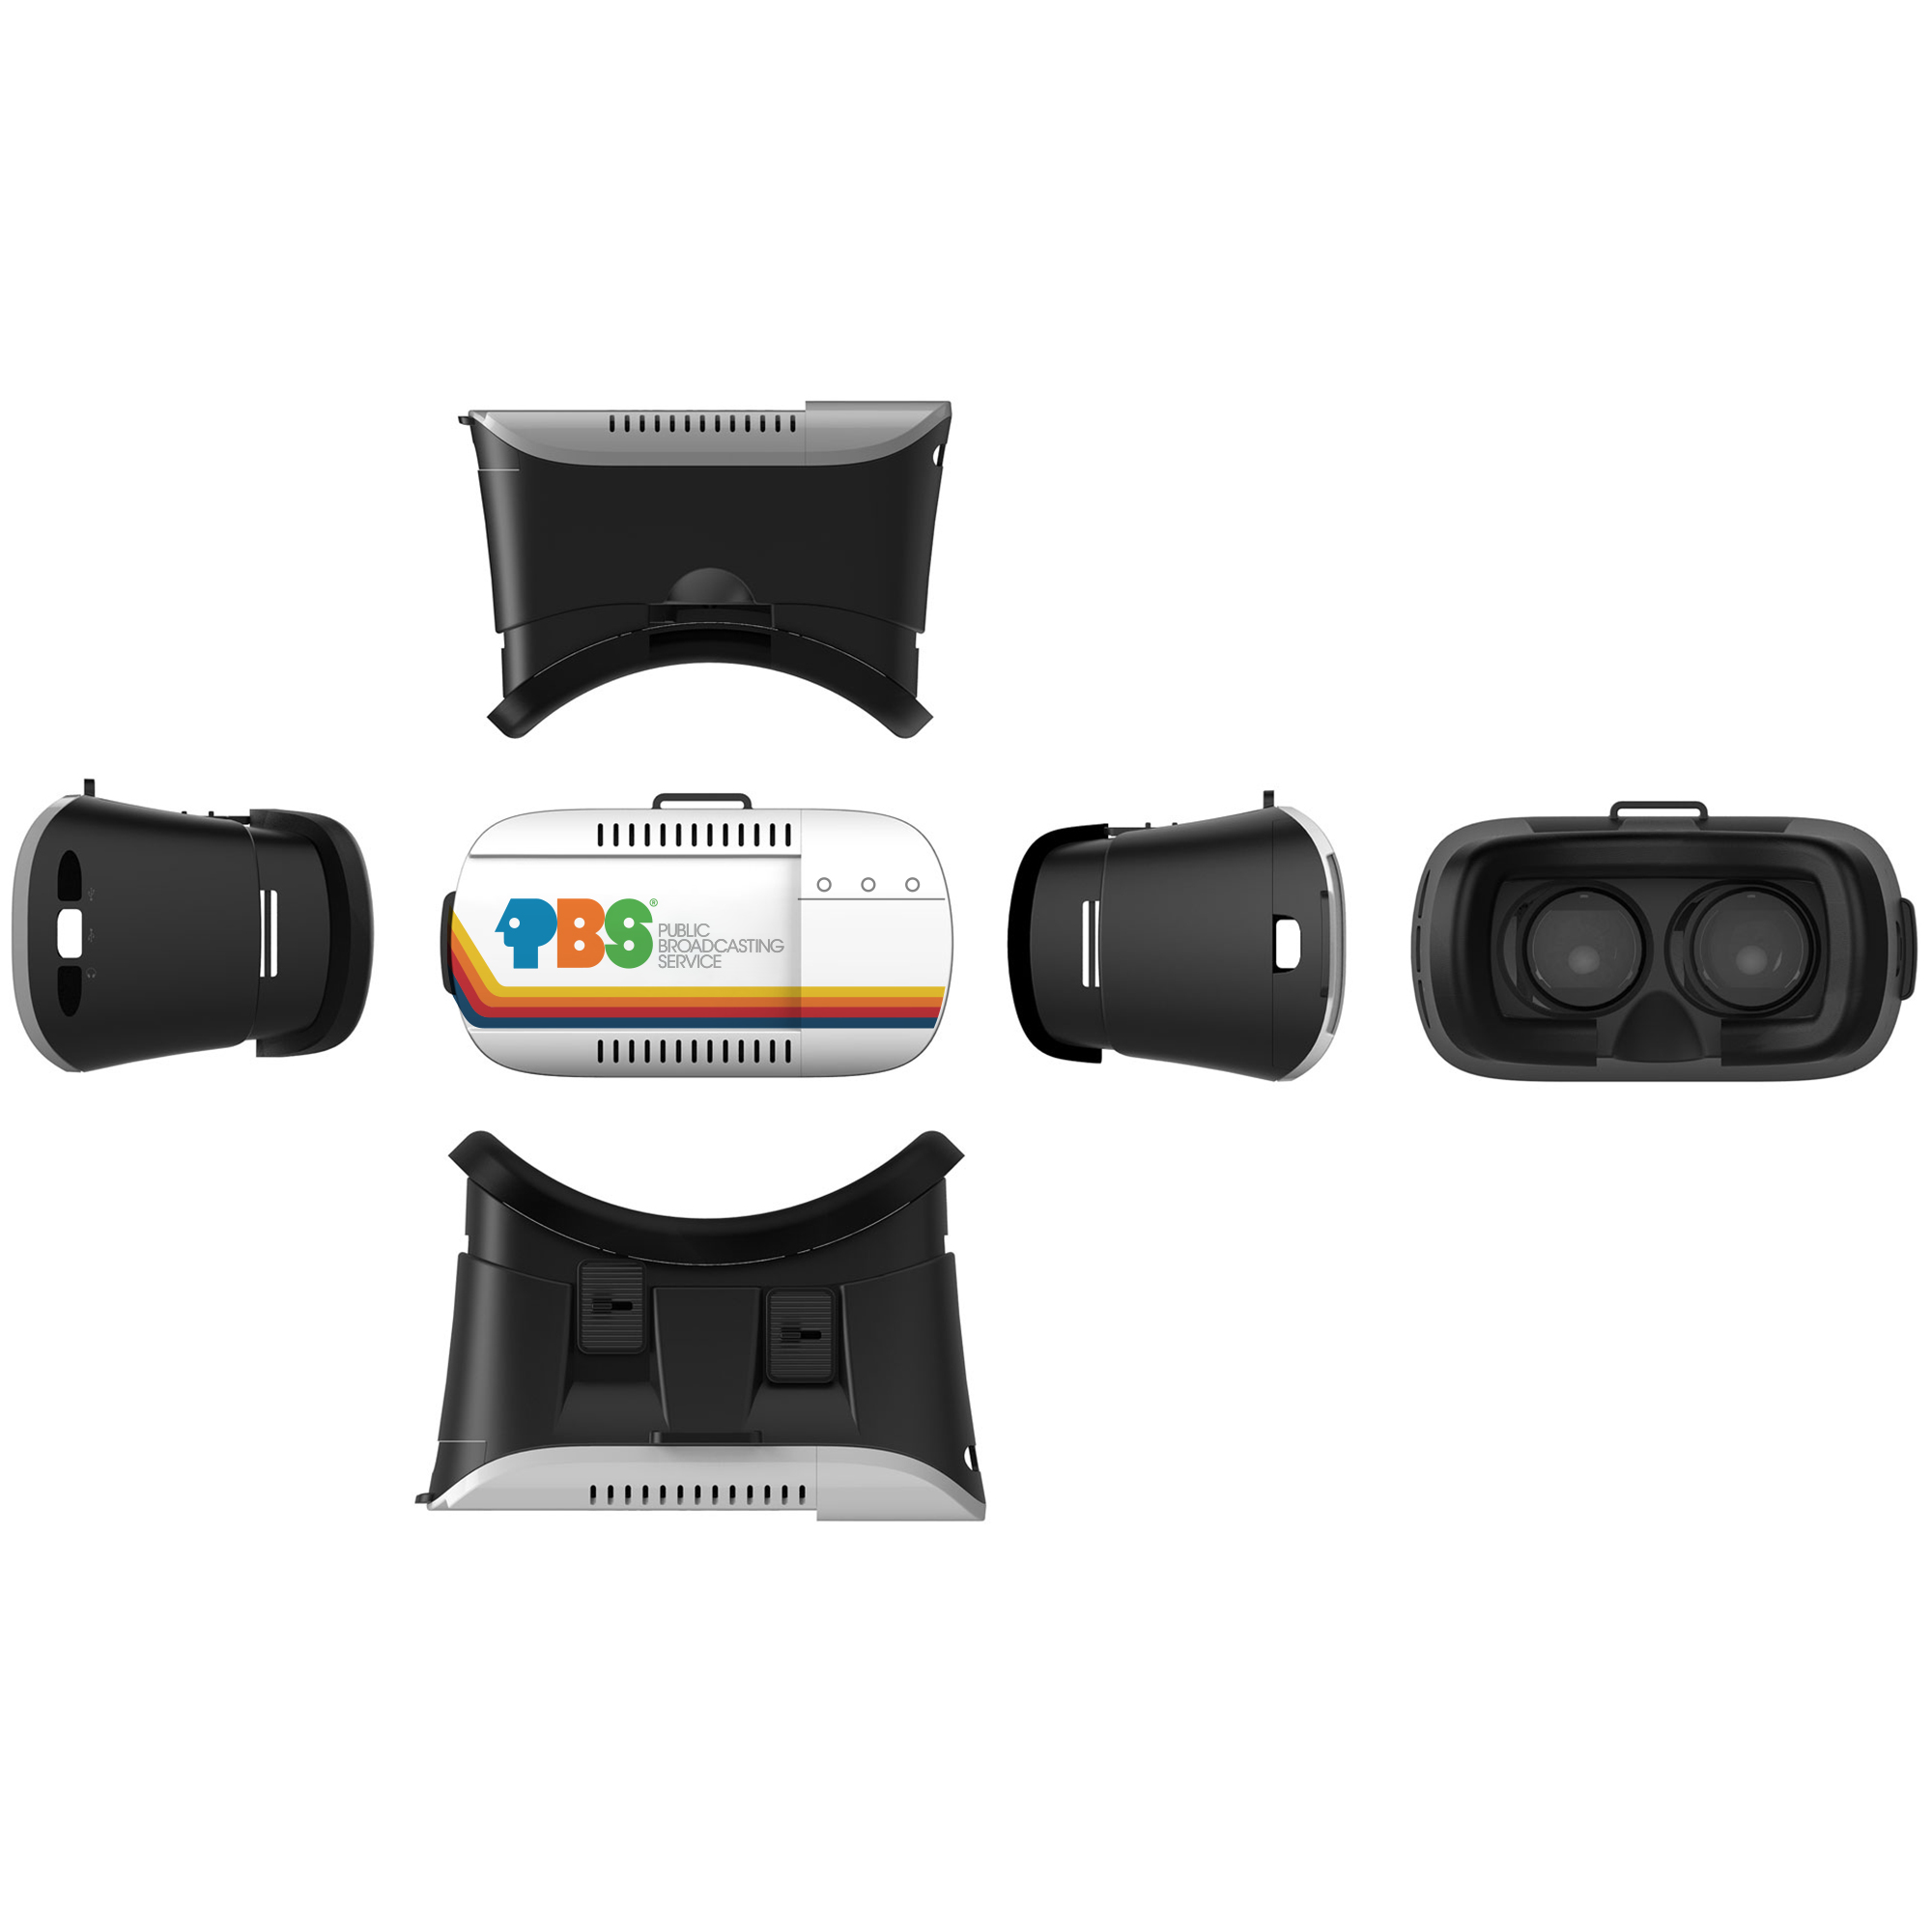 PBS Retro Space-Themed Virtual Reality Headset for Android and iPhone (White)- New - image 1 of 8